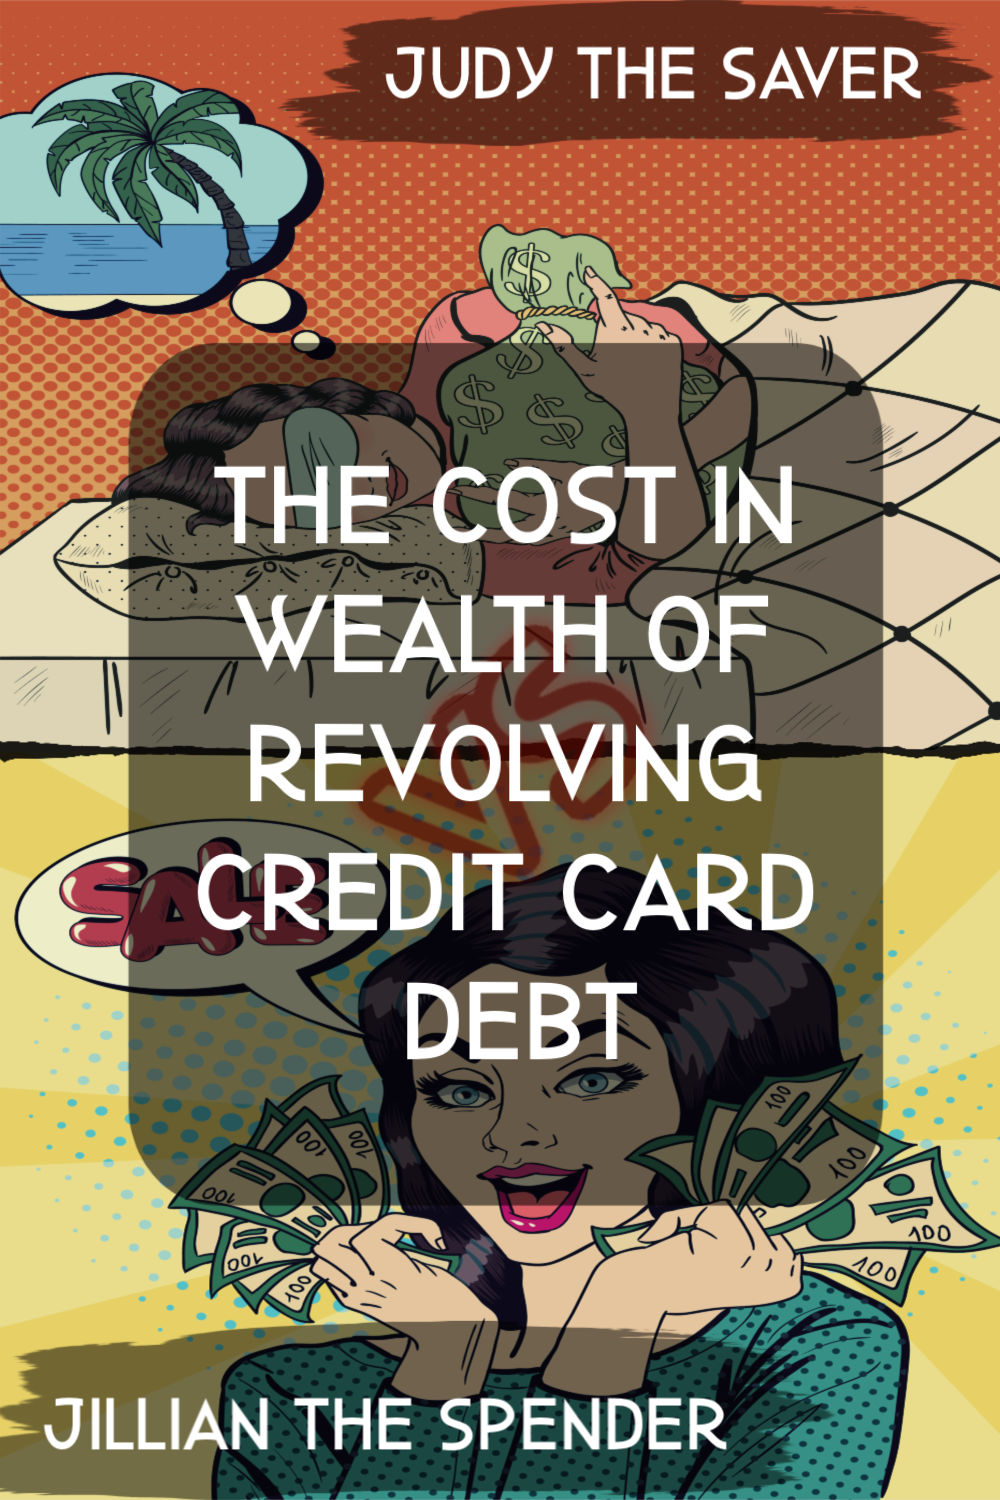 A Case Study on the Cost of Revolving Credit Card Debt